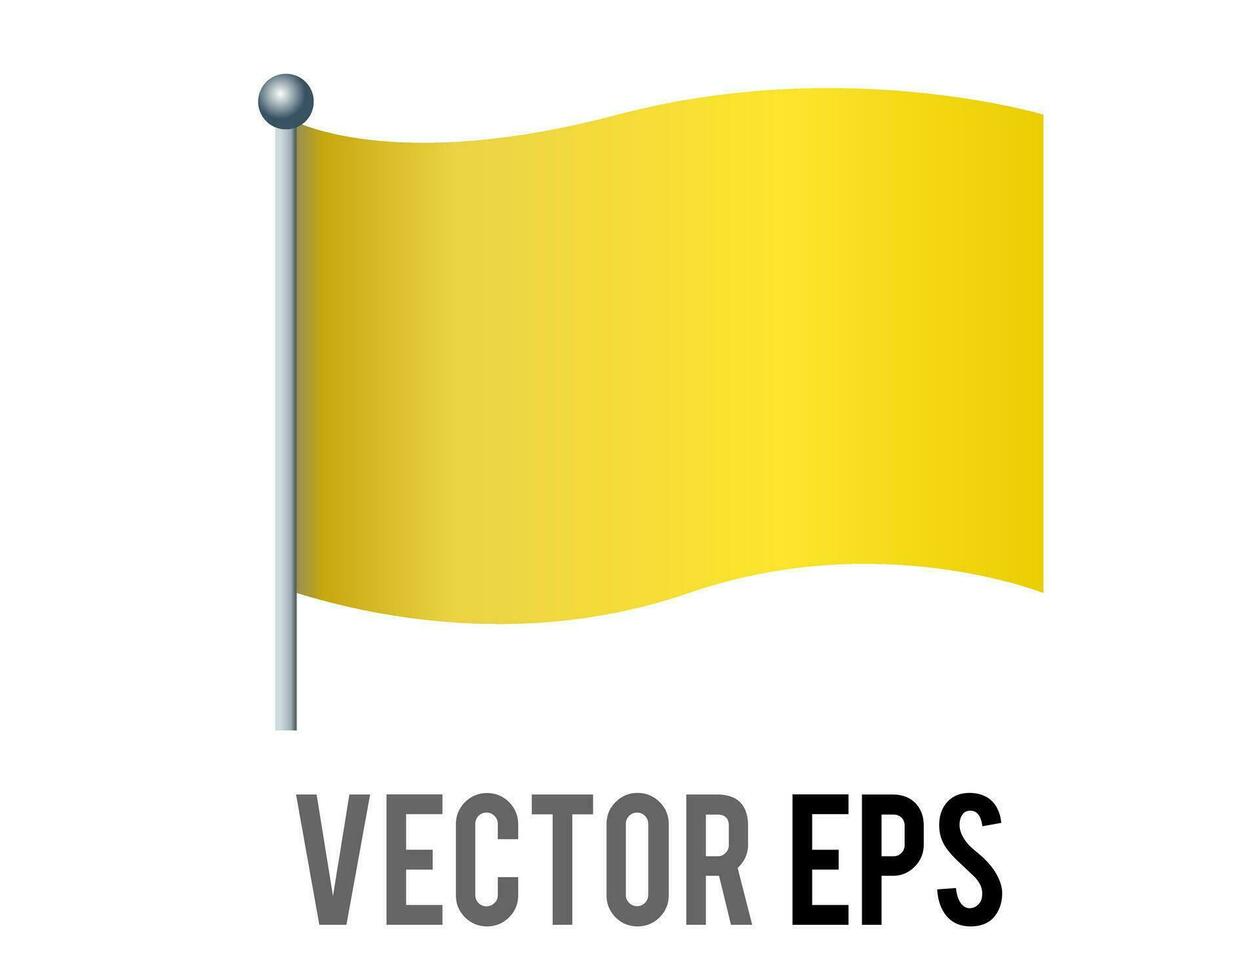 Vector isolated rectangular gradient yellow flag icon with silver pole